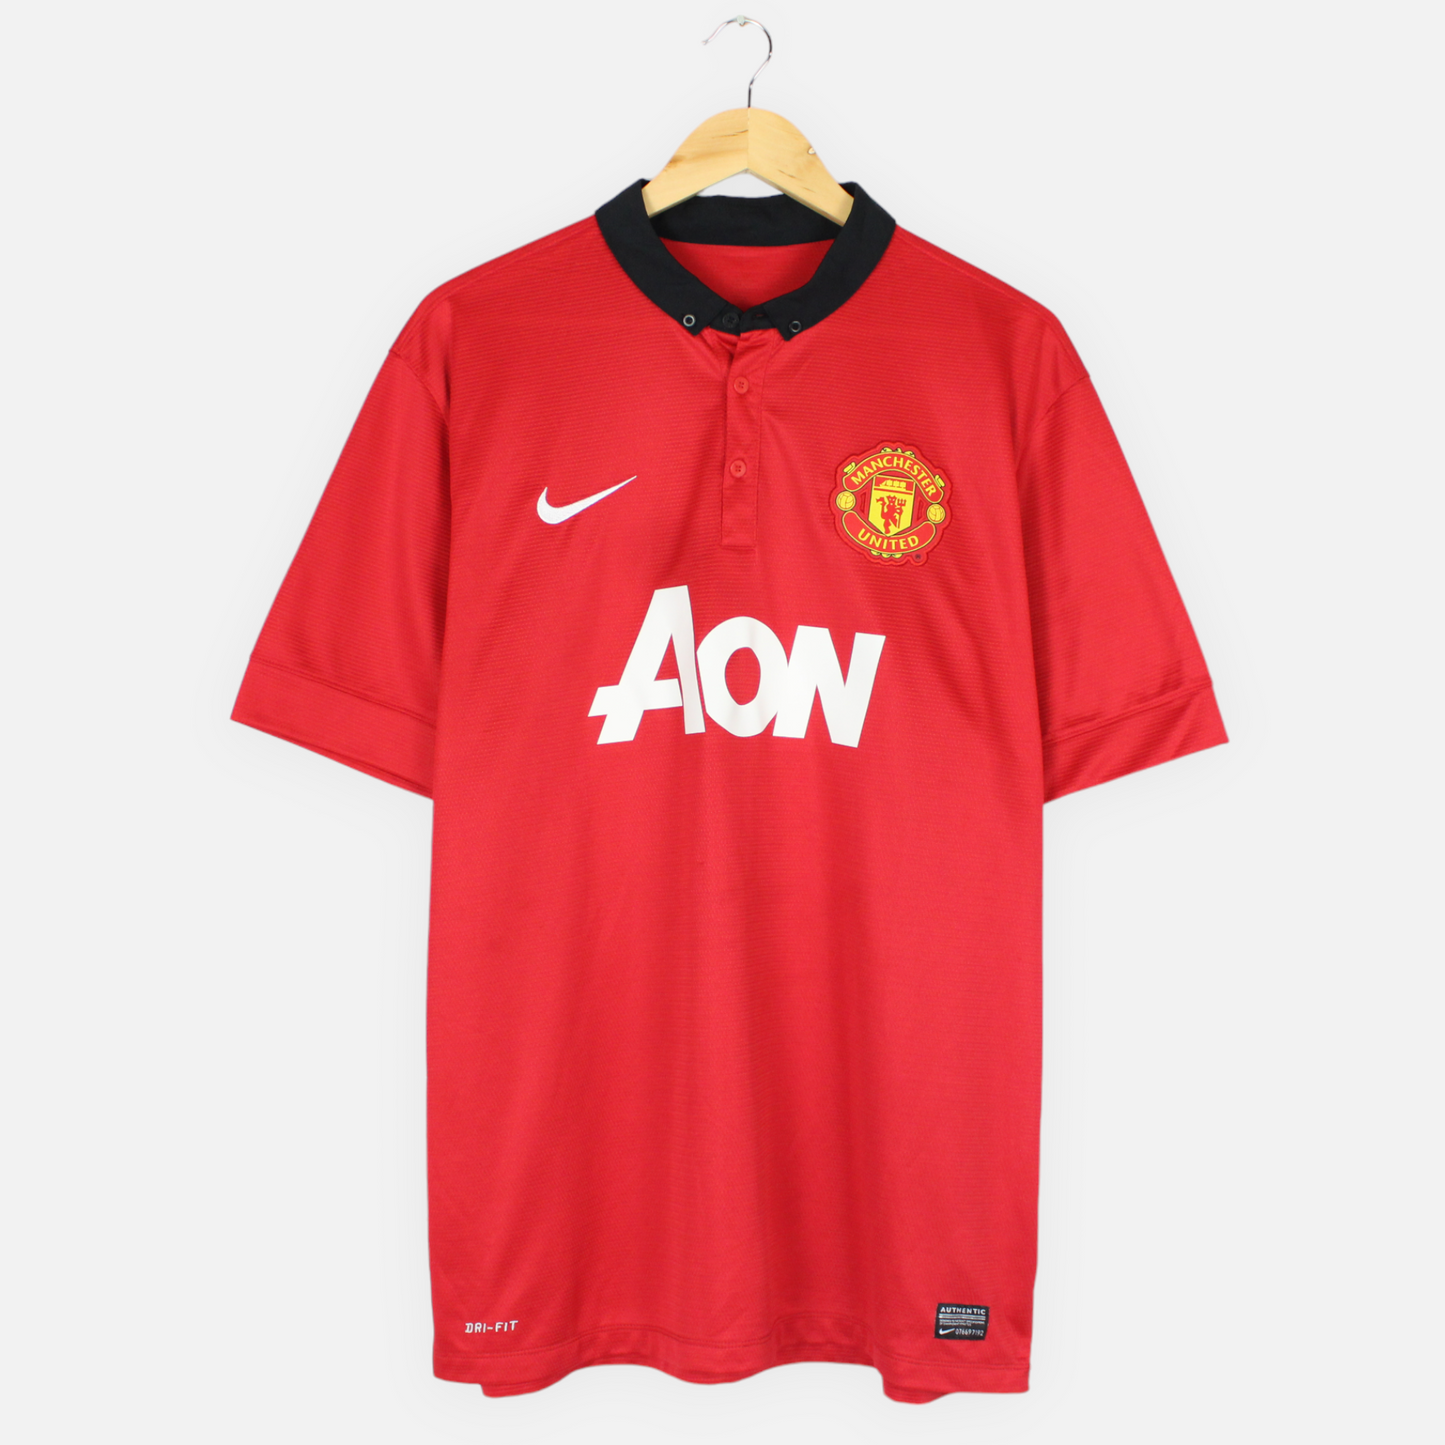 Manchester United 2013/14 Home Nike Jersey - XL